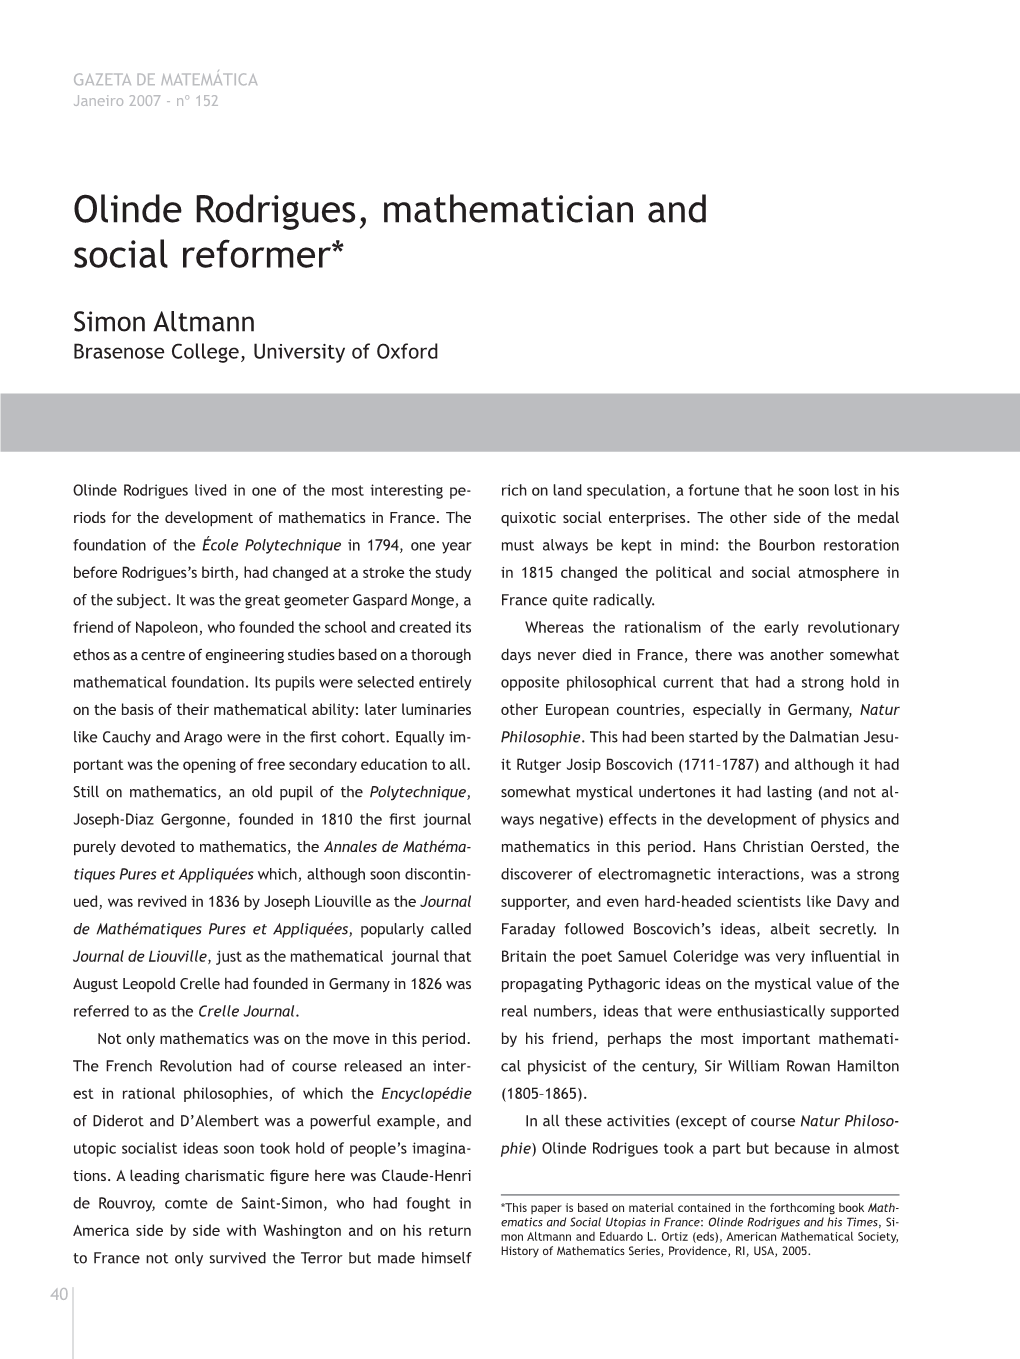 Olinde Rodrigues, Mathematician and Social Reformer*